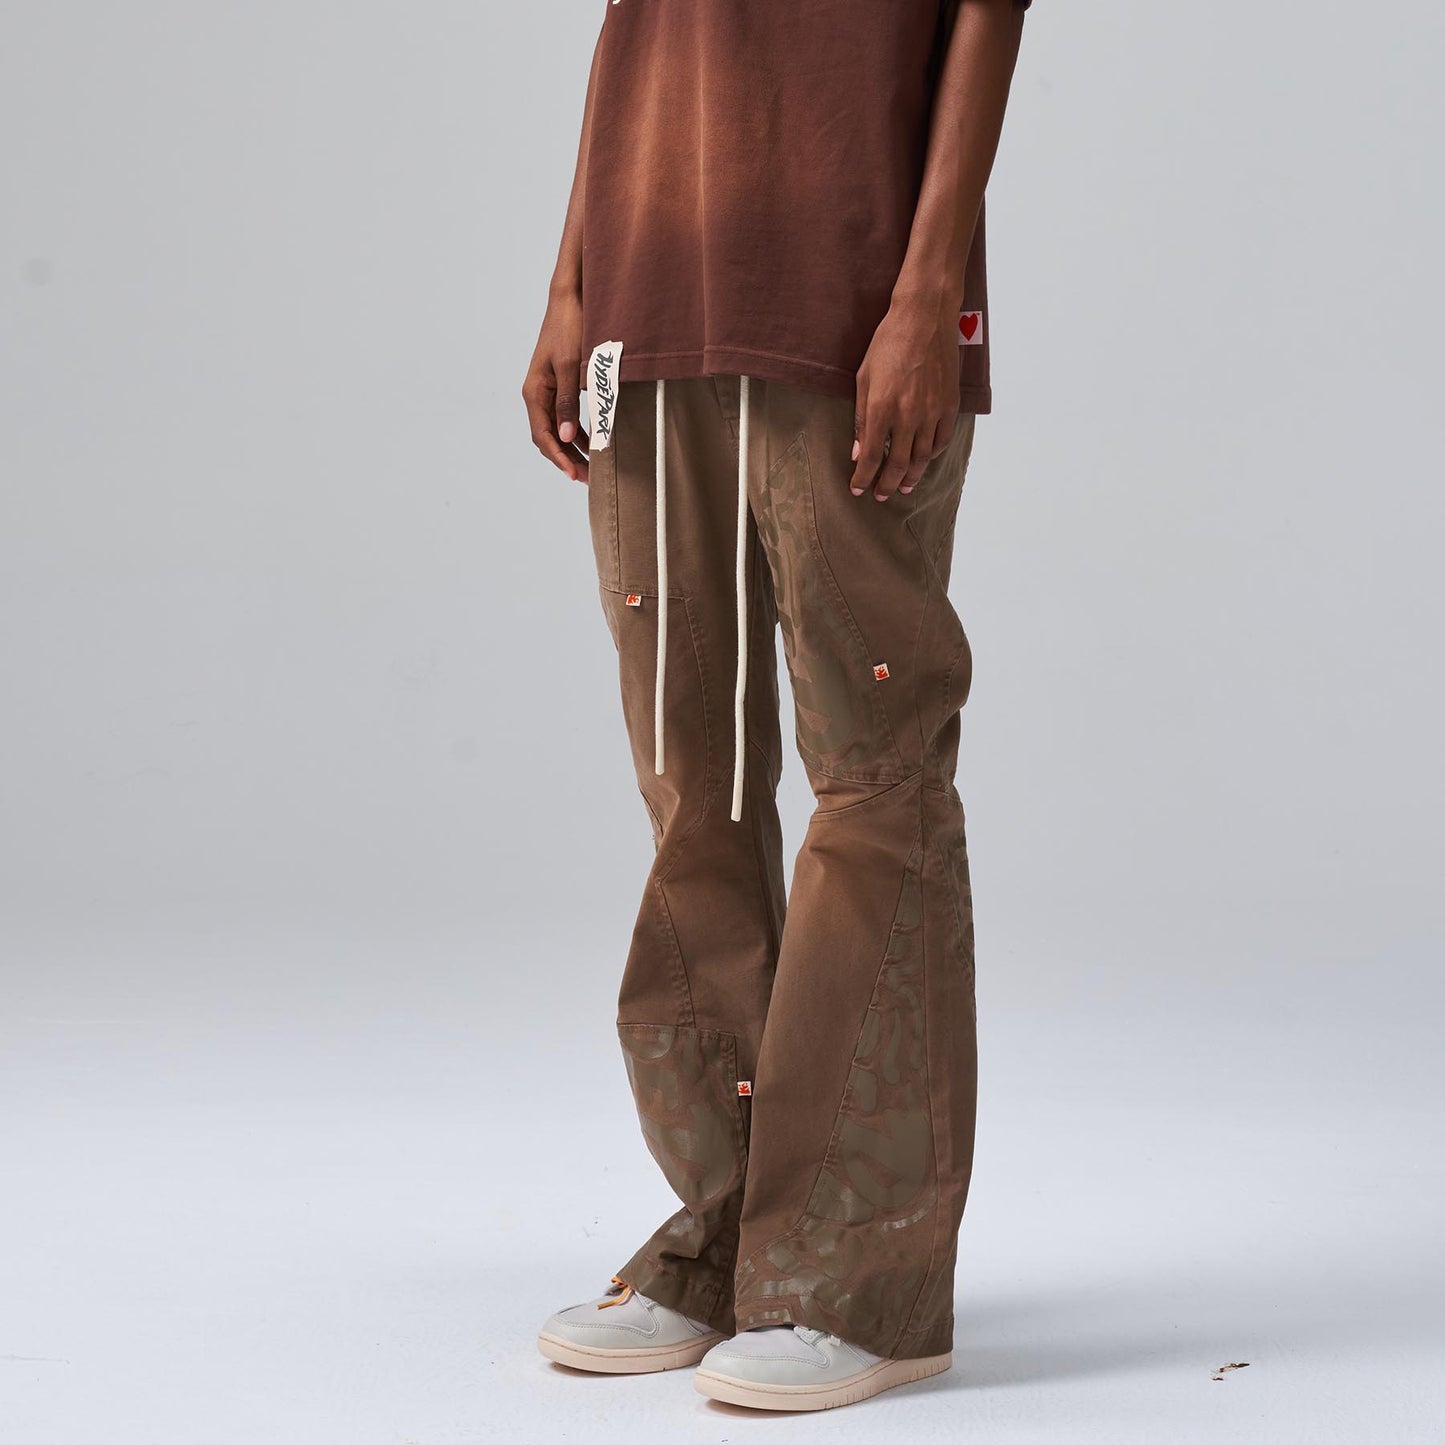 Bud Clippings Trouser - Brown